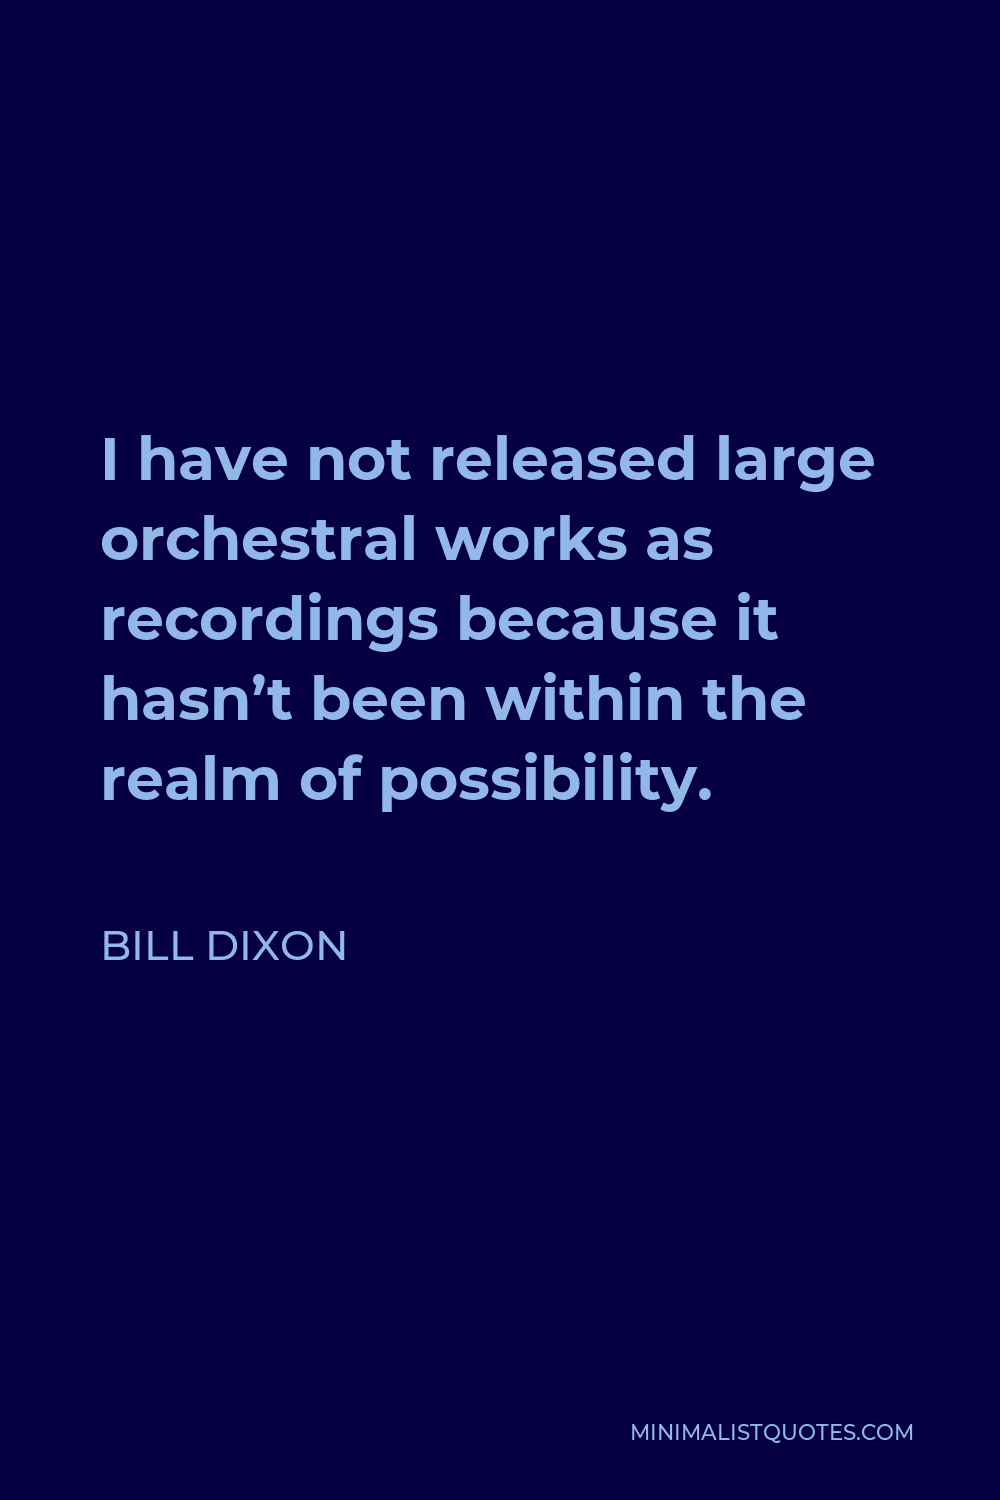 Bill Dixon Quote - I have not released large orchestral works as recordings because it hasn’t been within the realm of possibility.